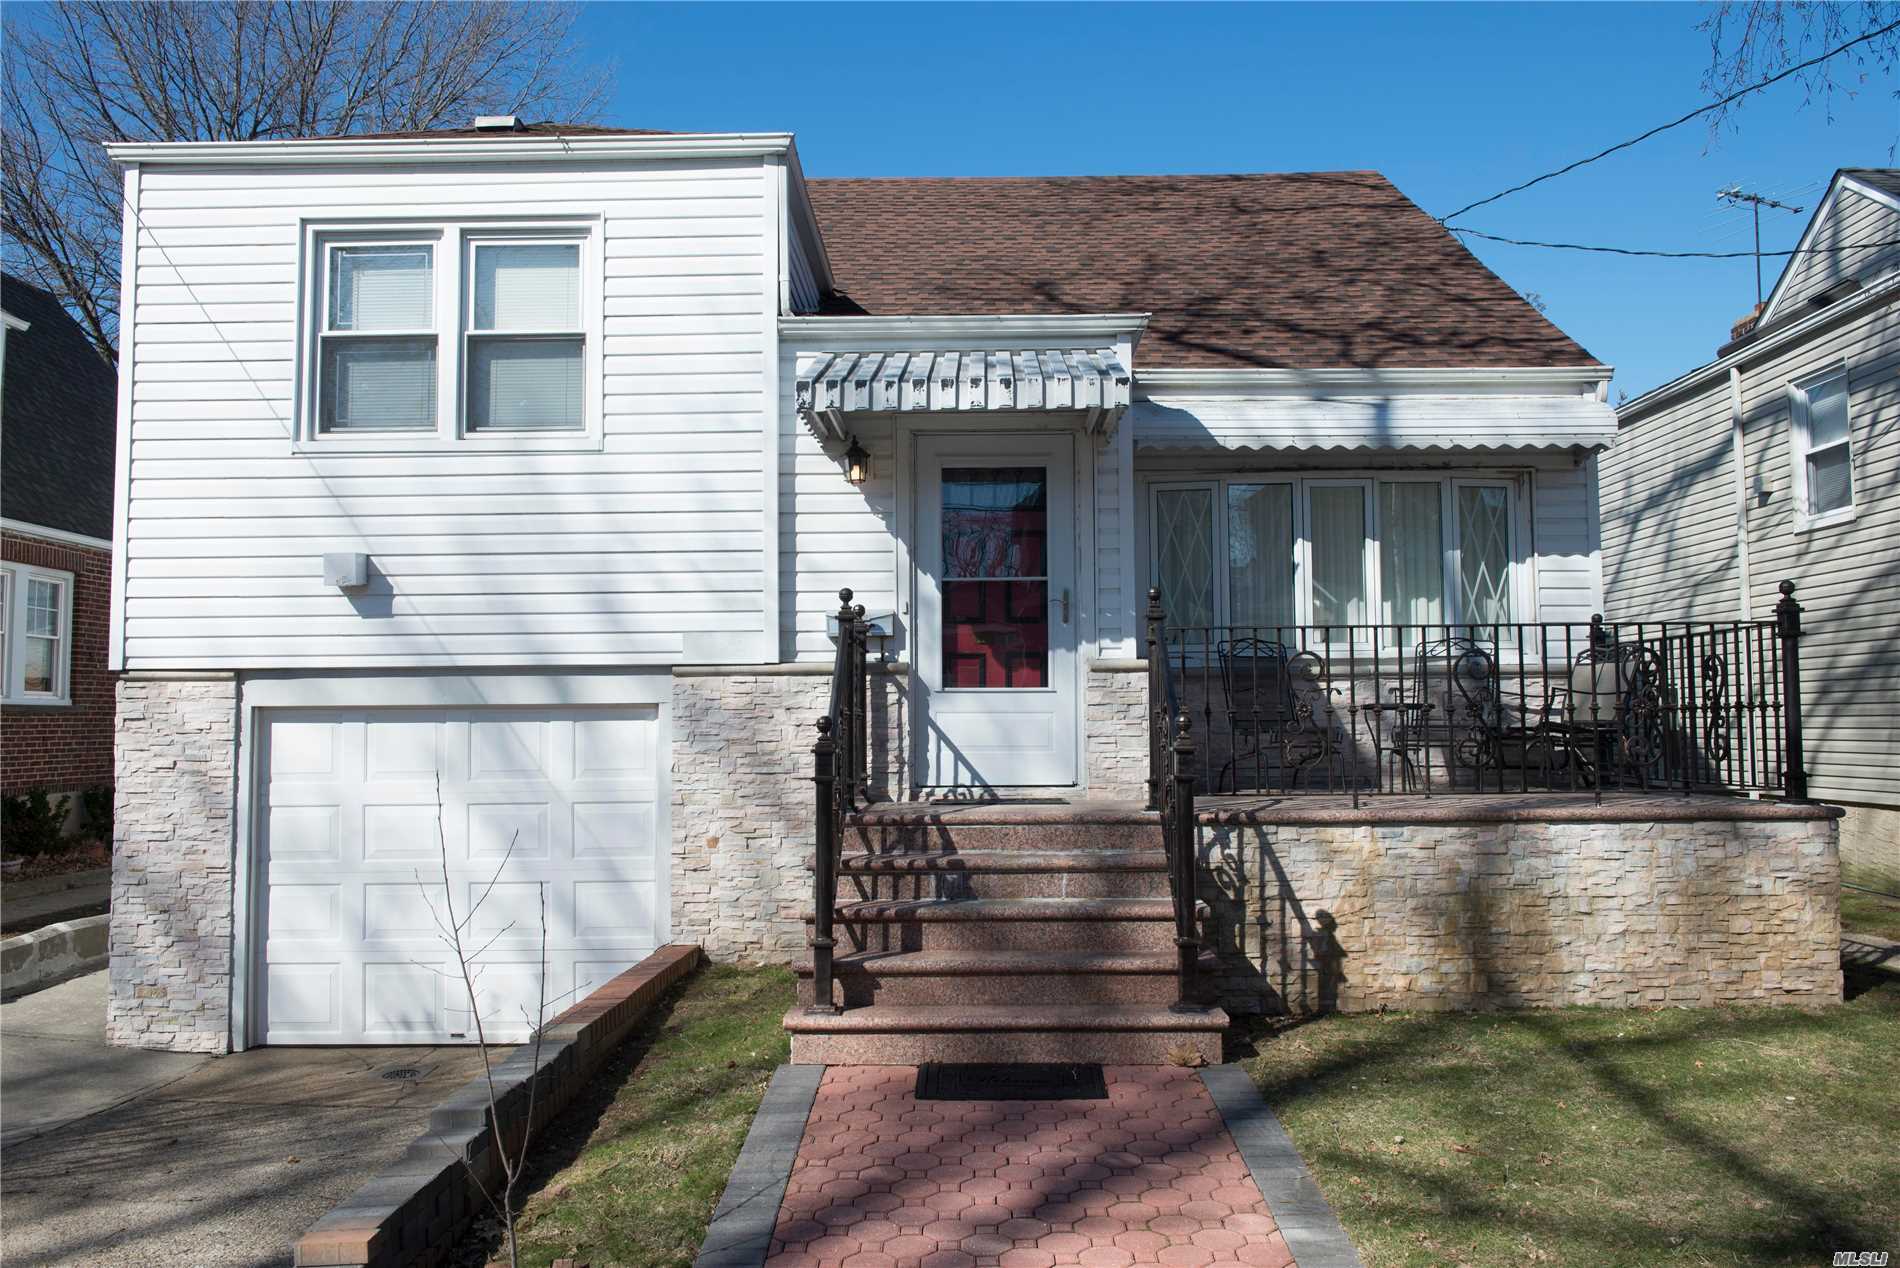 Excellent Condition Split Level Home With Spacious Layout With Many Upgrades. New Roof, New Baths, Modern Kitchen With Sliding Doors To Deck, Package A/C Units In Some Rooms. 3 Of The 4 Bedrooms Are Very Nice Size. Large Lr/Dr. Large Yard. Near Shopping And Transportation.